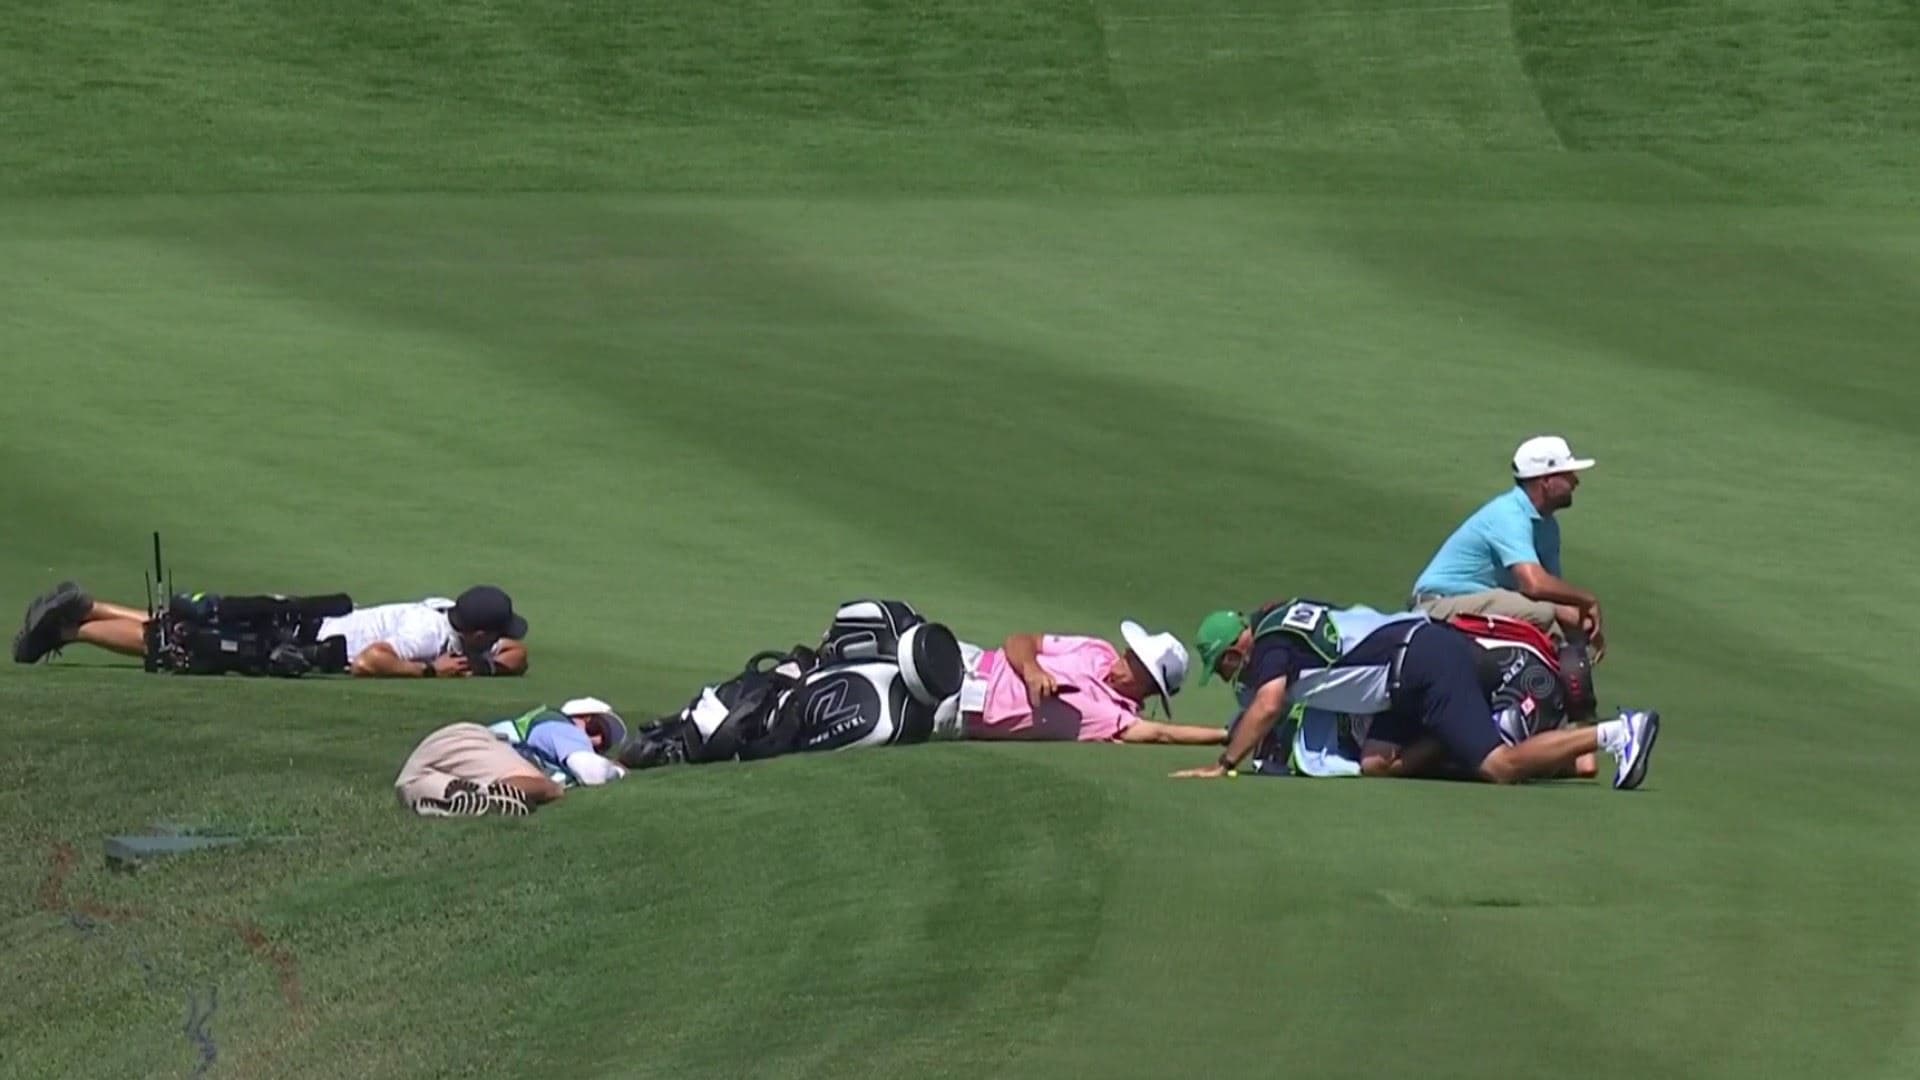 Swarm of bees cause Erik Van Rooyen and Co. to duck and cover on 10th hole at Mexico Open